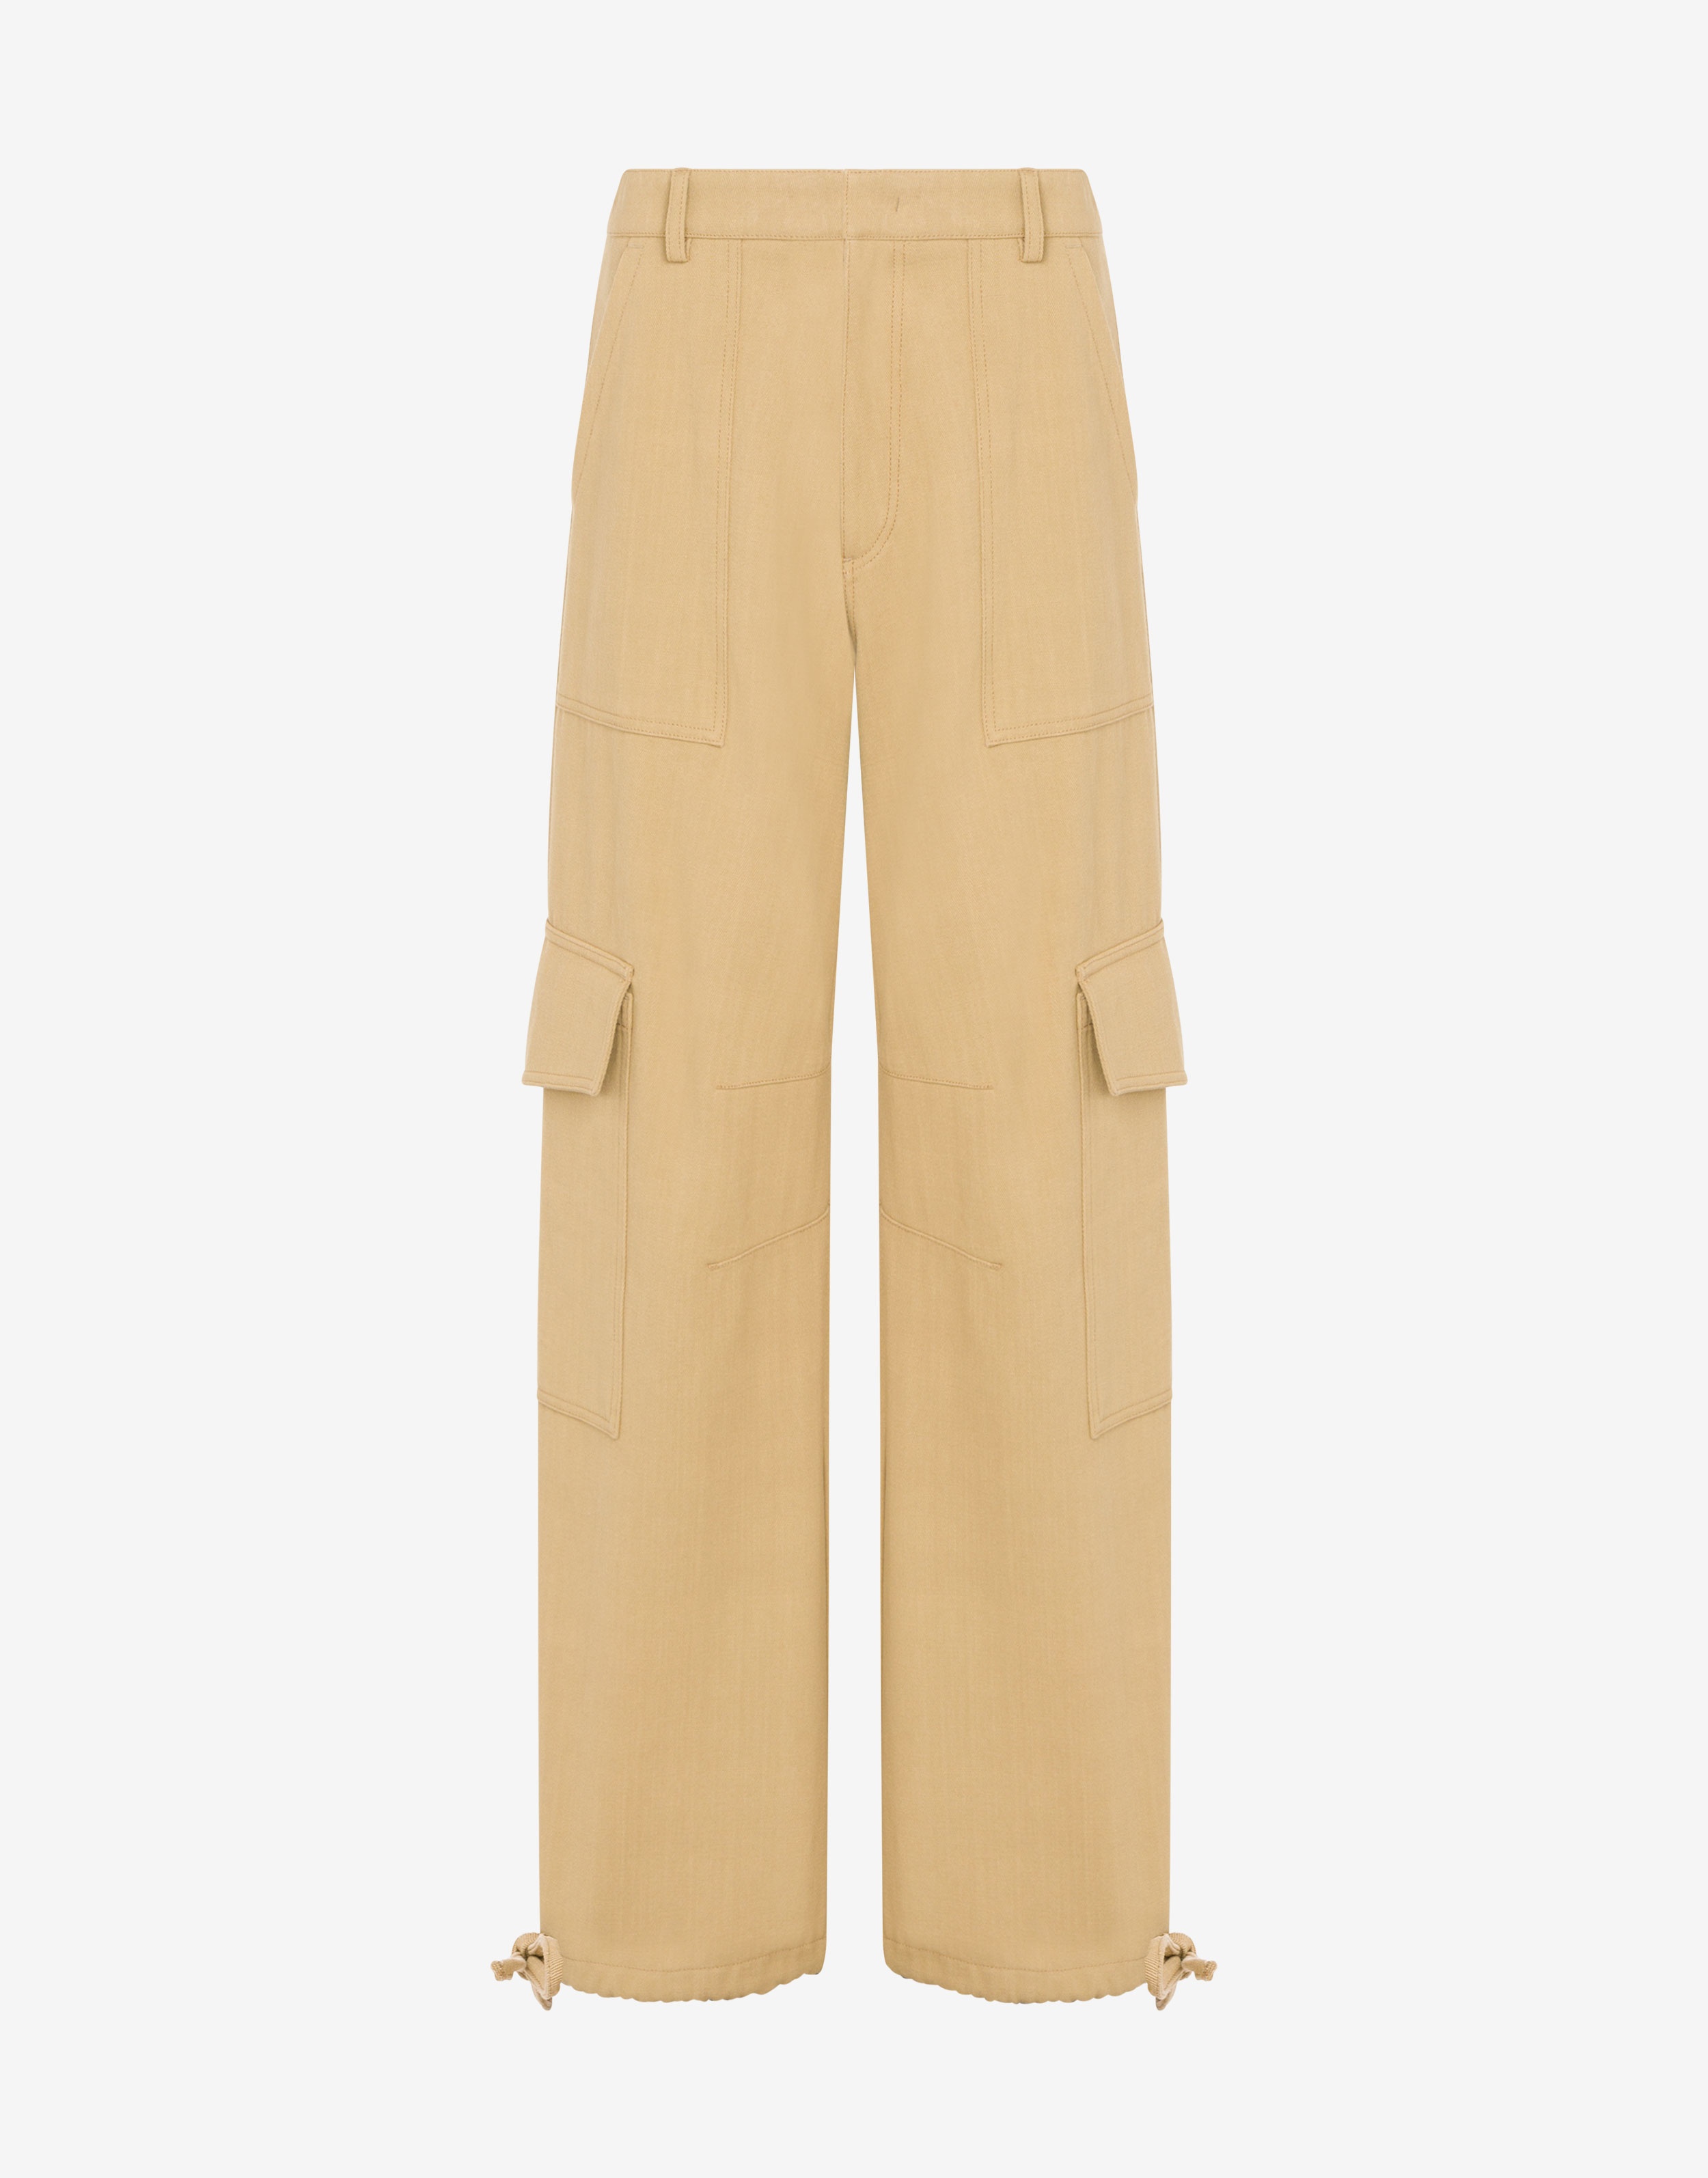 COTTON BULL OVERSIZED TROUSERS - 1